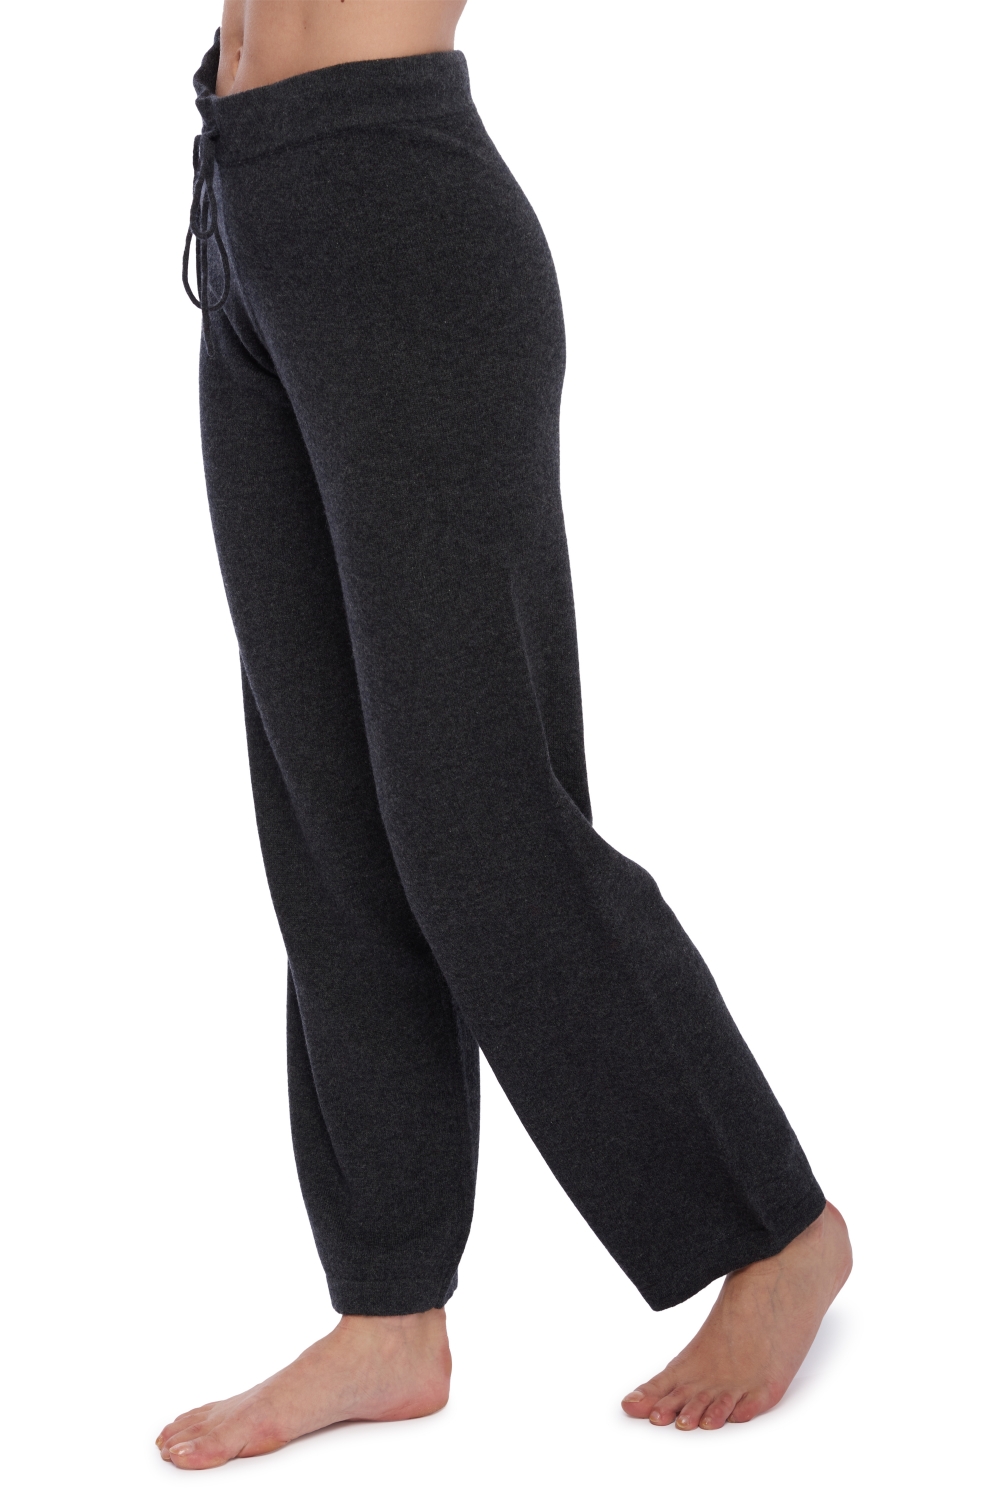 Cashmere ladies trousers leggings malice charcoal marl xl